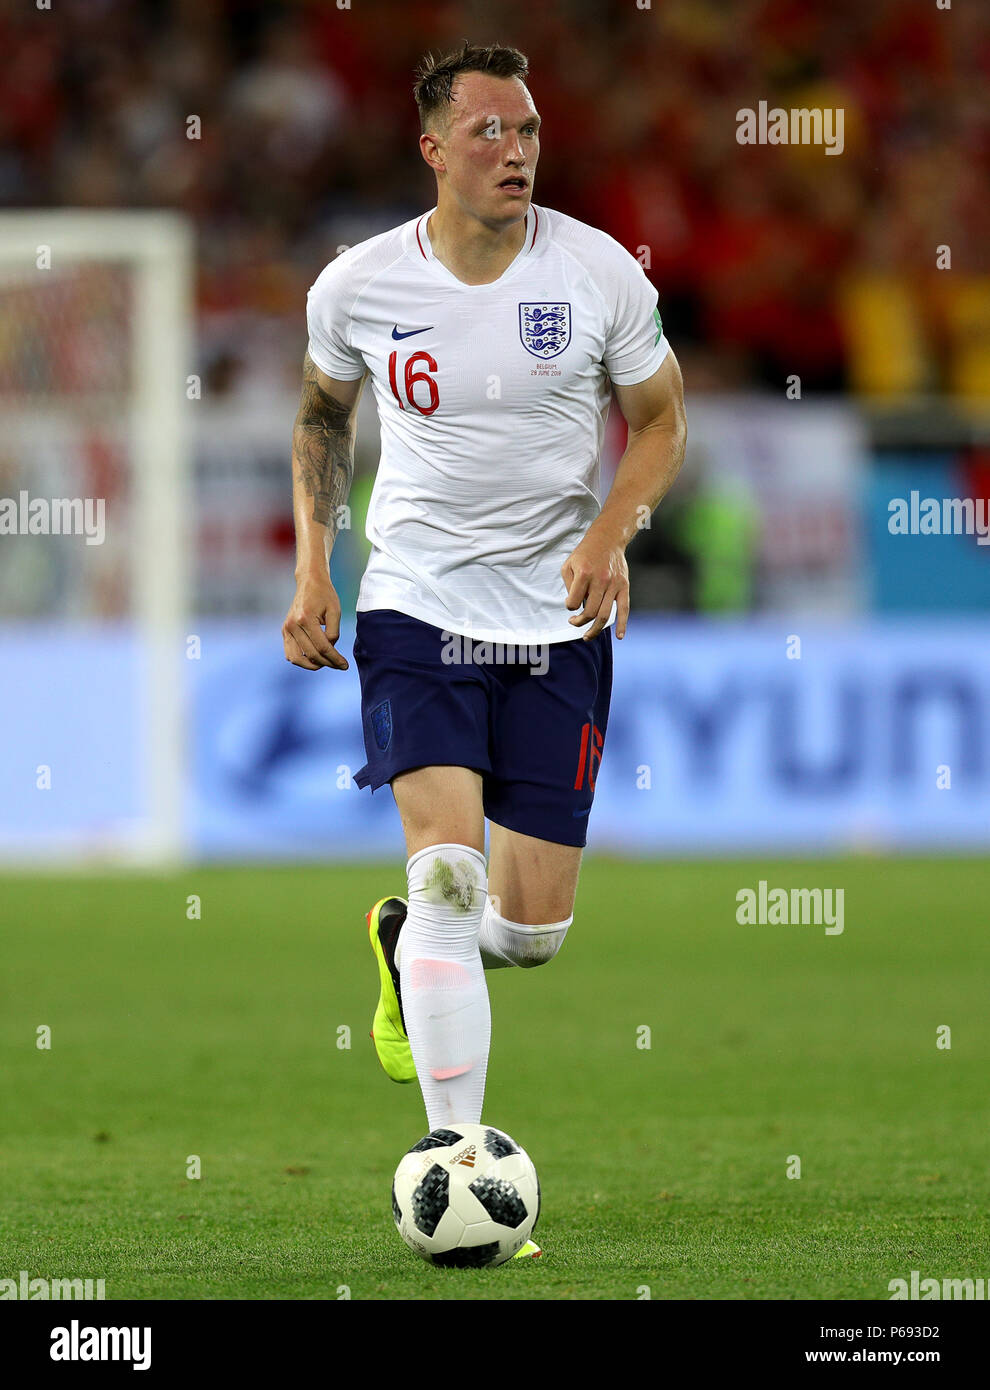 England's Phil Jones during the FIFA World Cup Group G match at Kaliningrad Stadium. PRESS ASSOCIATION Photo. Picture date: Thursday June 28, 2018. See PA story WORLDCUP England. Photo credit should read: Aaron Chown/PA Wire. RESTRICTIONS: Editorial use only. No commercial use. No use with any unofficial 3rd party logos. No manipulation of images. No video emulation Stock Photo